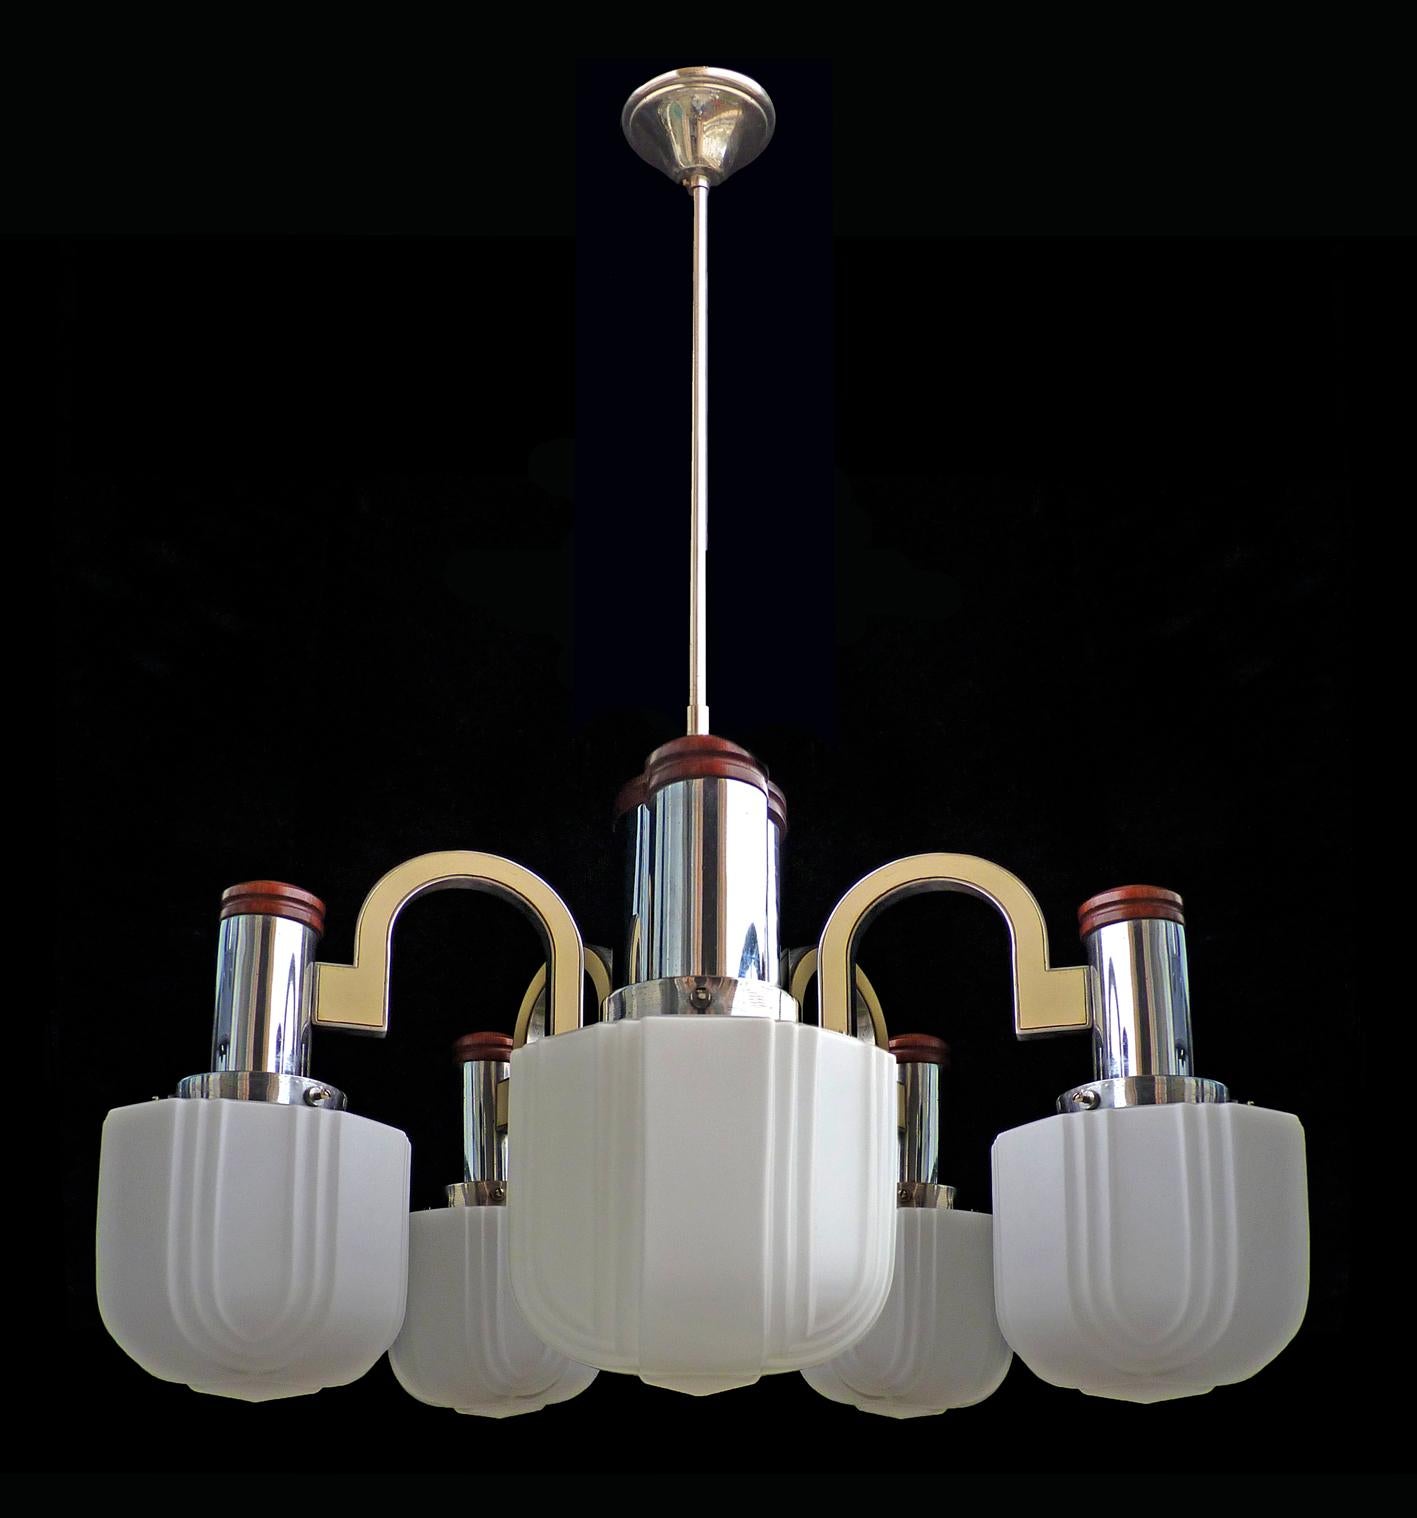 Fabulous vintage French Art Deco Opaline skyscraper glass shades 5-light chrome chandelier
Measures: 
Diameter 27.5 in/ 70 cm
Height: 37.5 in/ 95 cm
Weight: 24 lb/ 11 Kg
5 cased glass shades/chromed brass (16 cm/ 6 in)
5 light bulbs E14/ Good